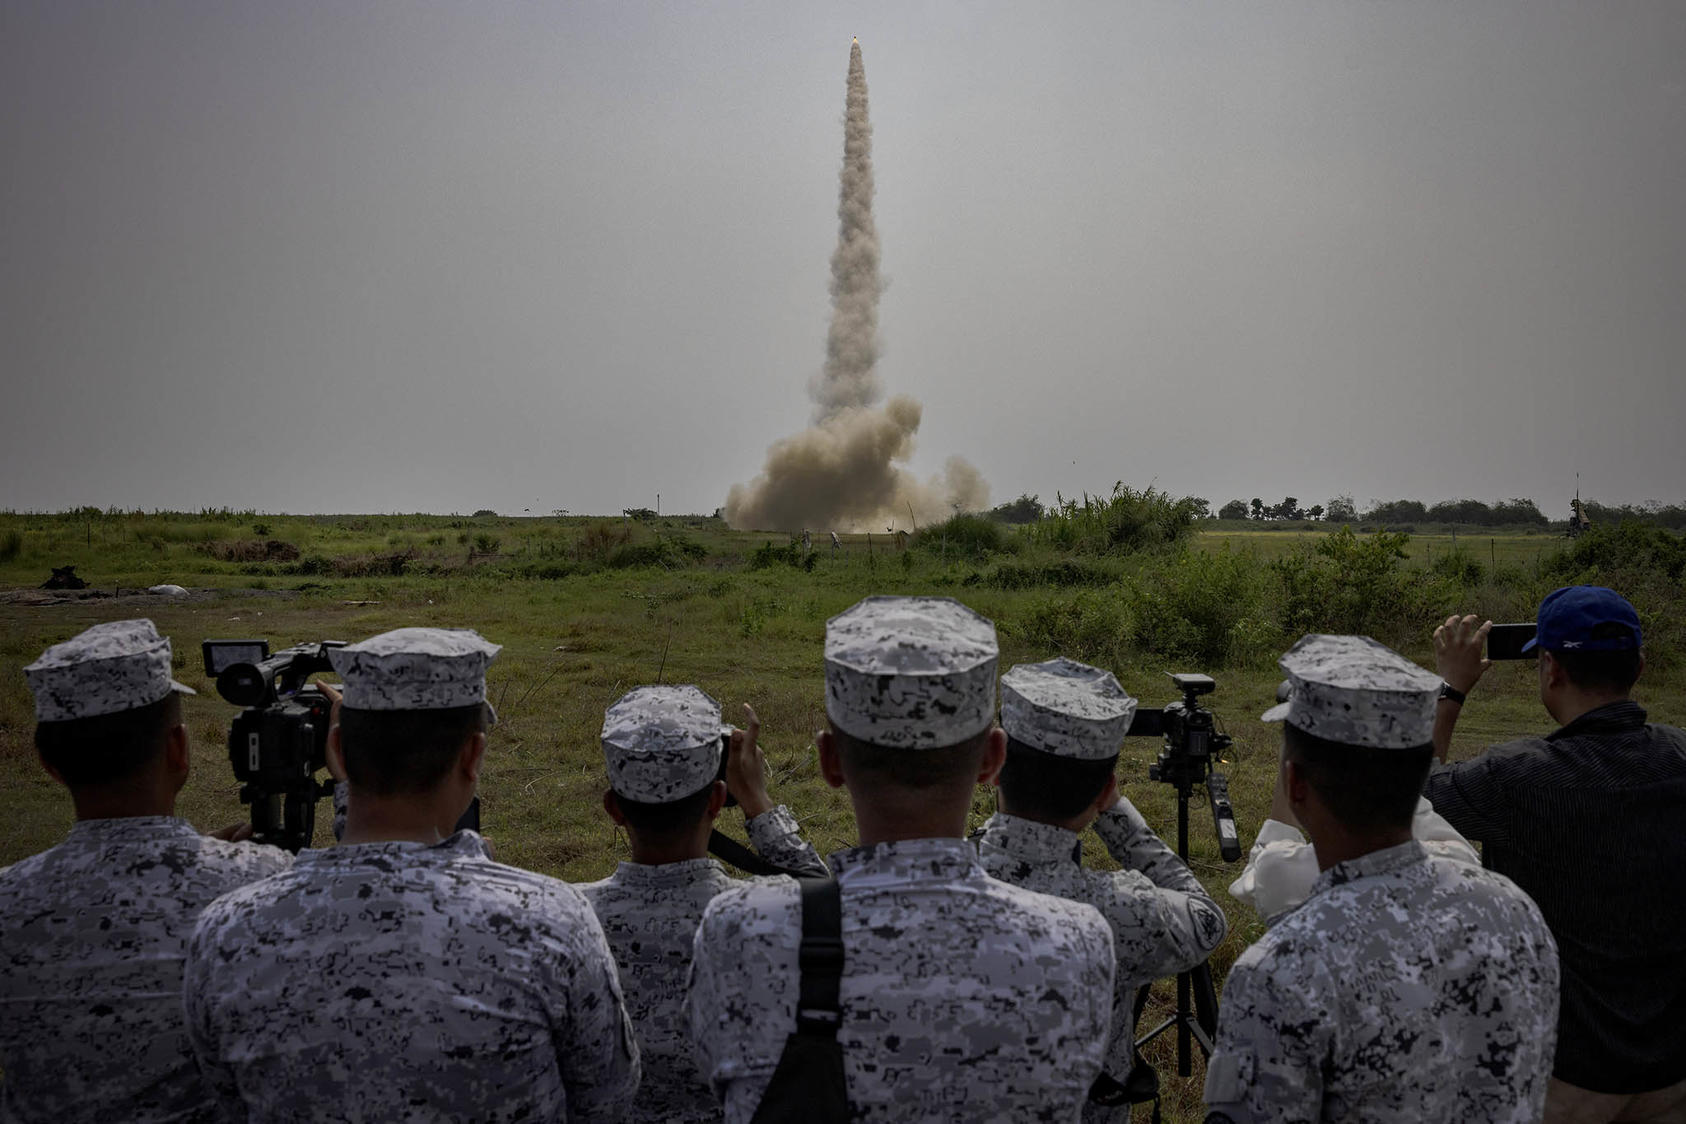 Philippine Navy officers watch a Patriot surface-to-air missile fired during joint exercises with U.S. forces in San Antonio, Philippines, on Tuesday, April 25, 2023. (Ezra Acayan/The New York Times)